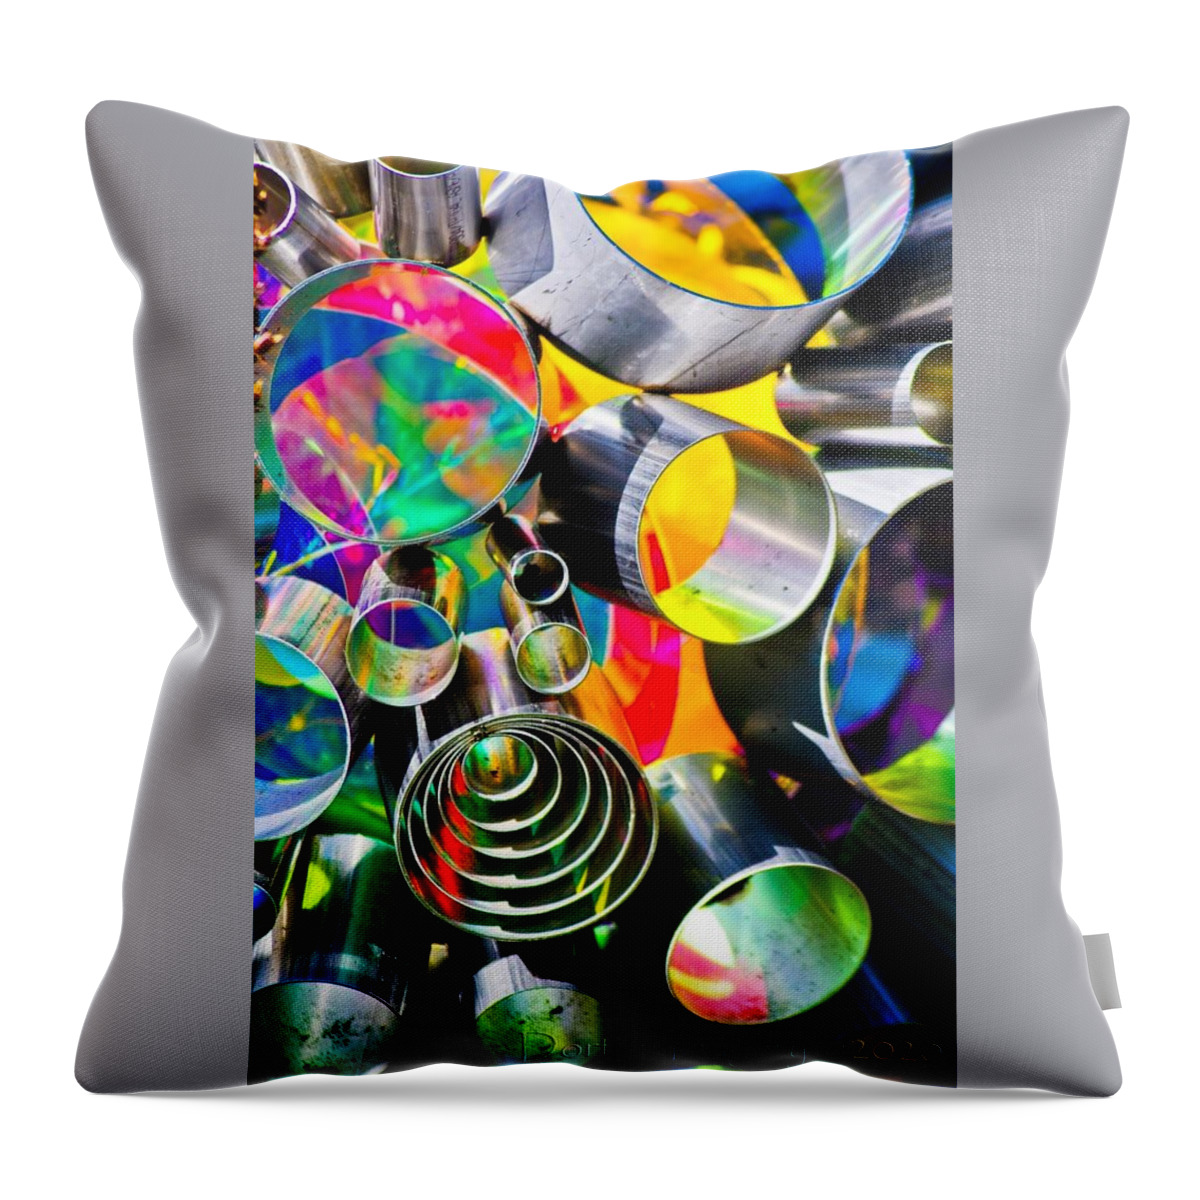  Throw Pillow featuring the photograph Abstract by Stephen Dorton